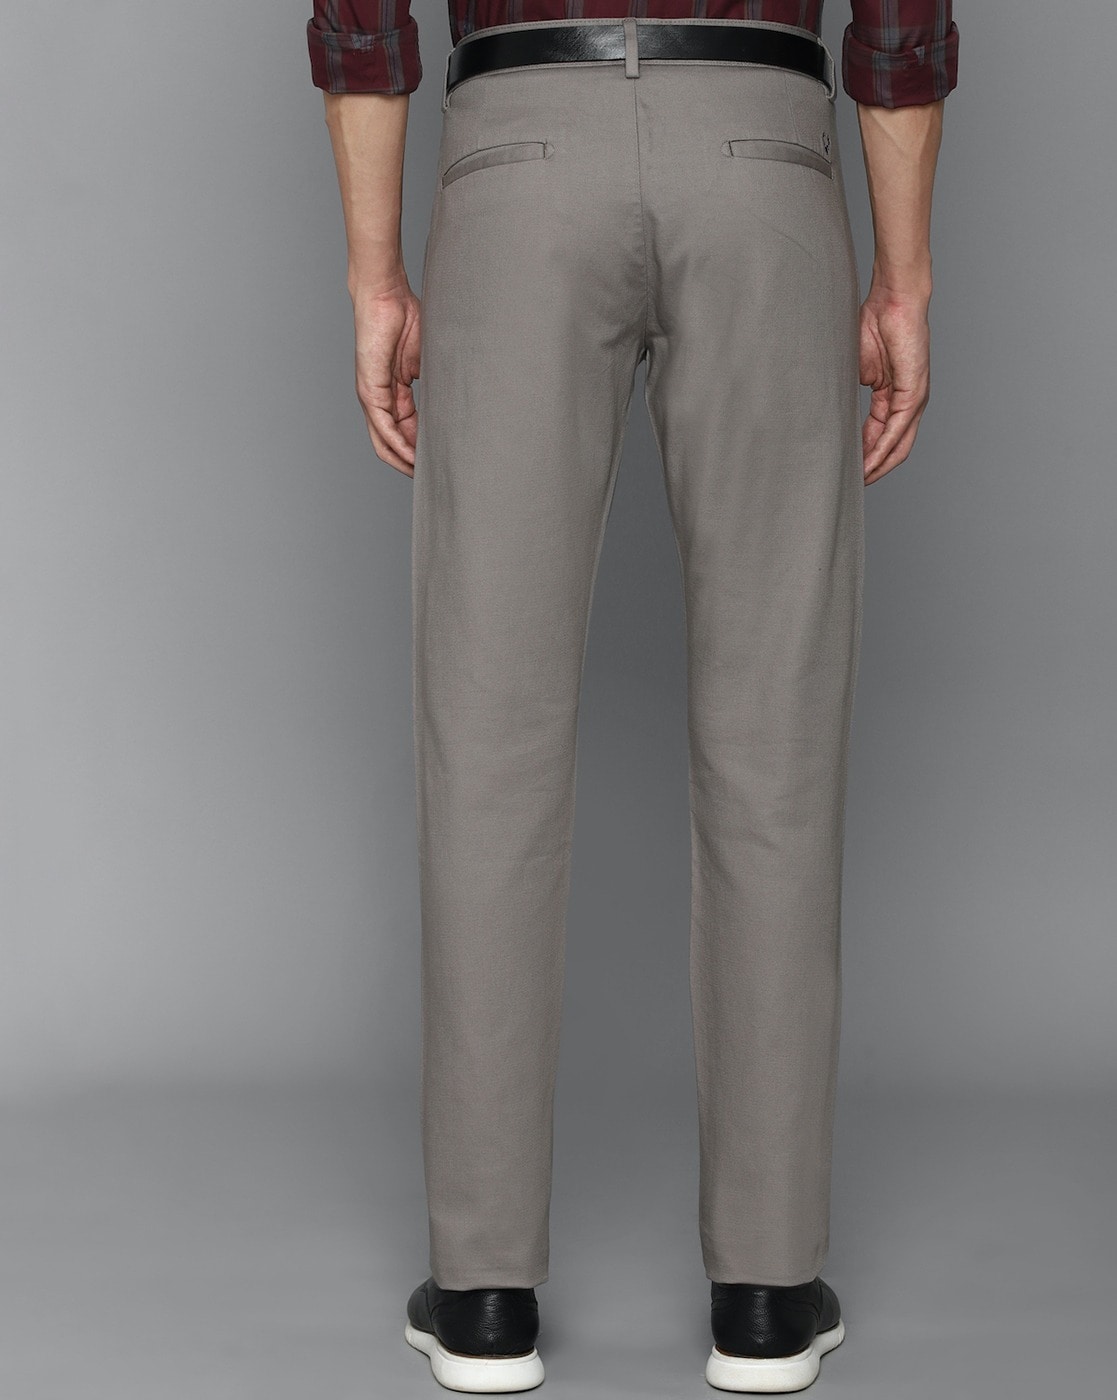 Share 160+ allen solly grey trousers best